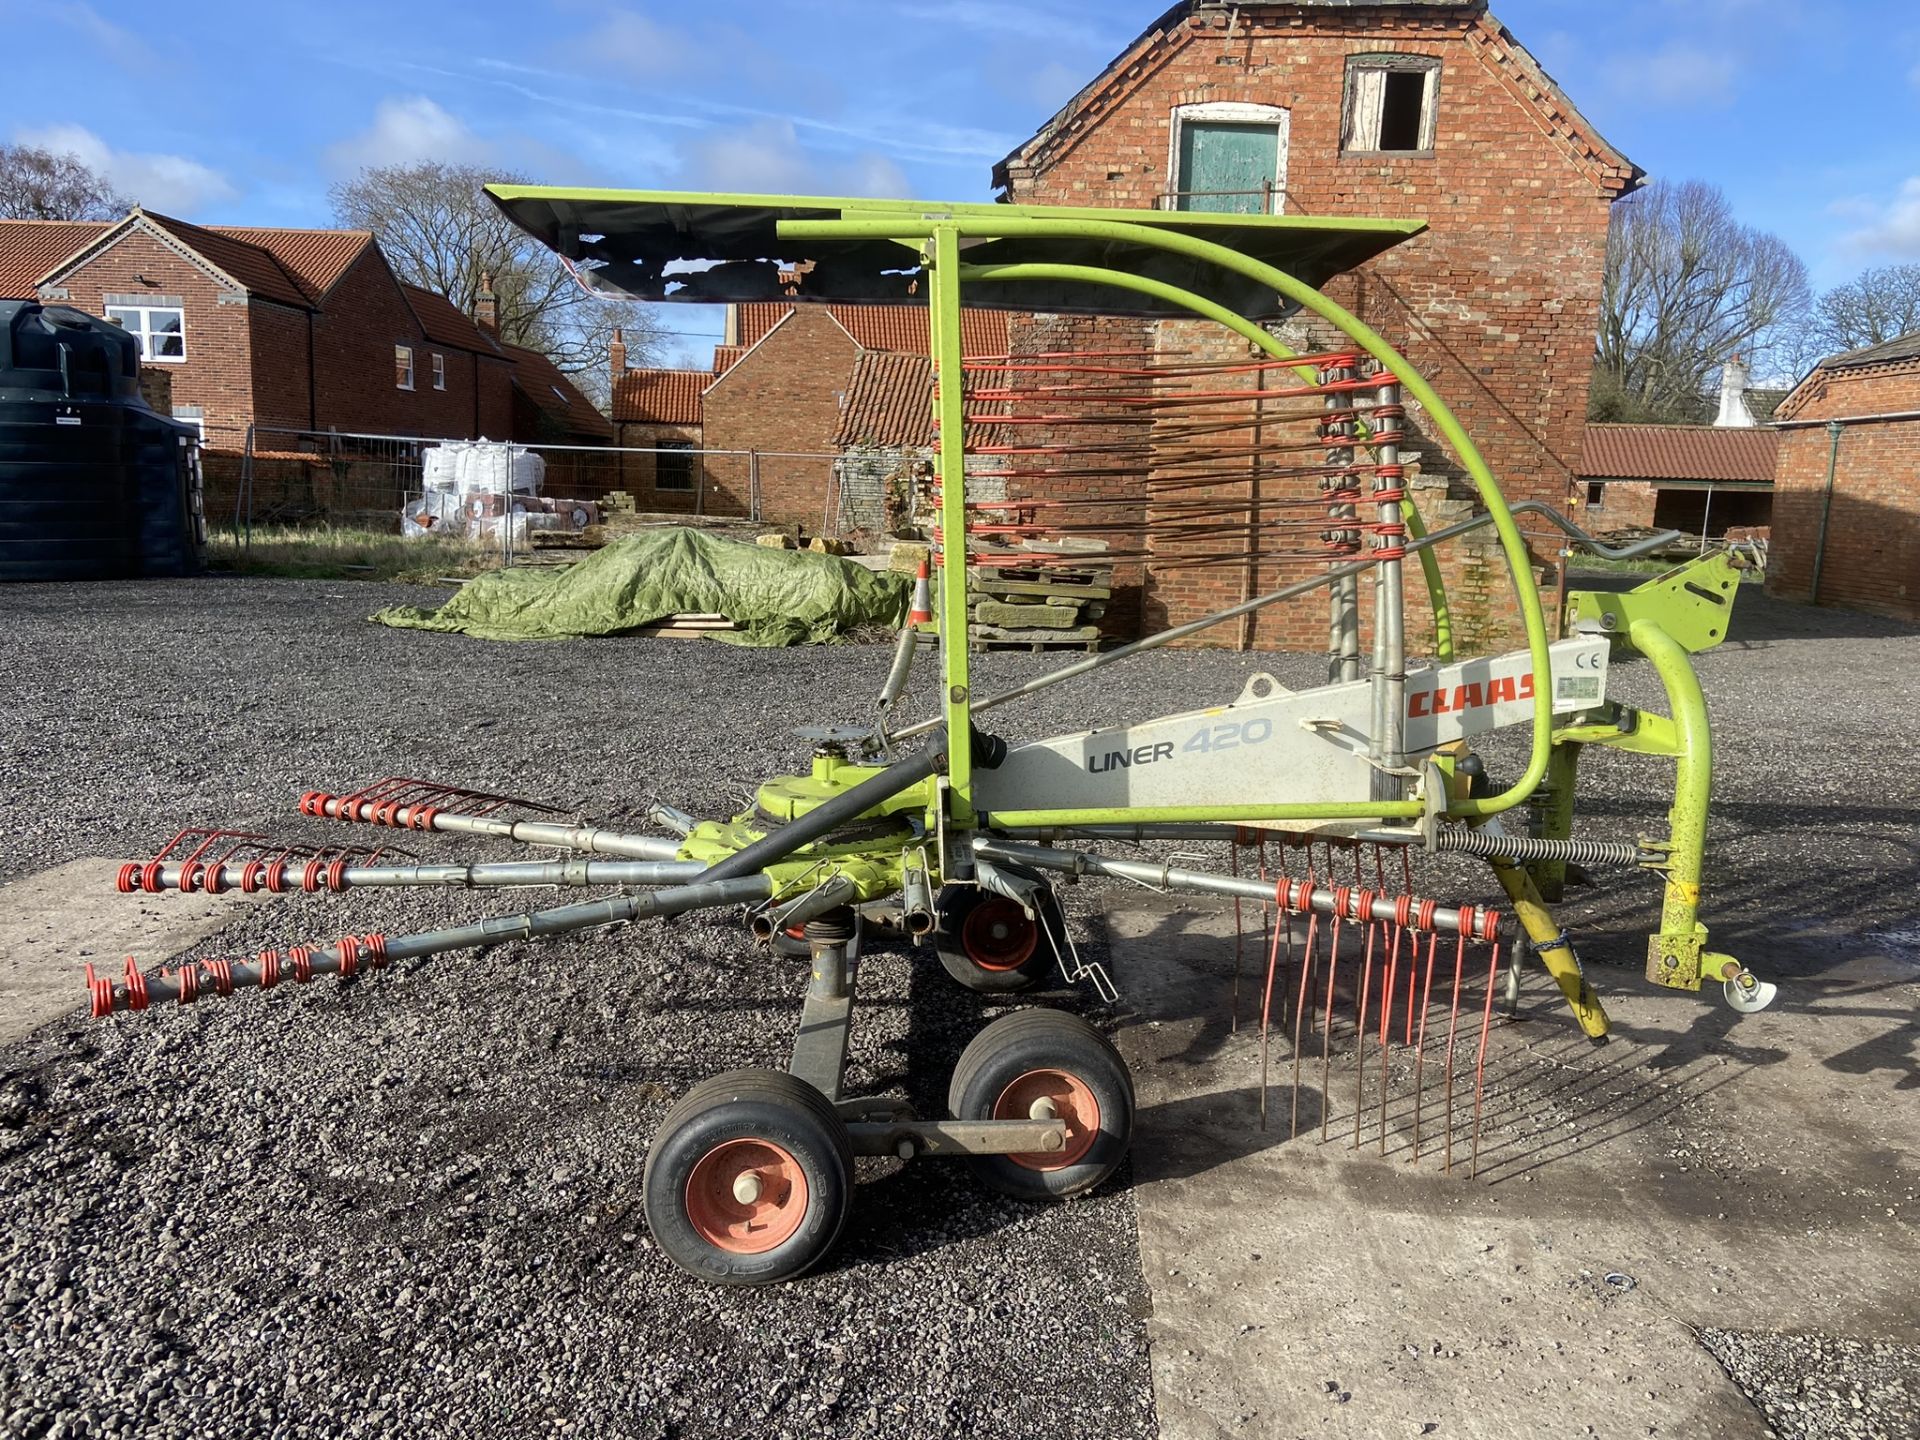 2018 Claas Volto 800 Type G53 Tedder, S/No. G5303321, 6 Rotors, Working Width 7.7m, Weight 1080kg - Image 2 of 8